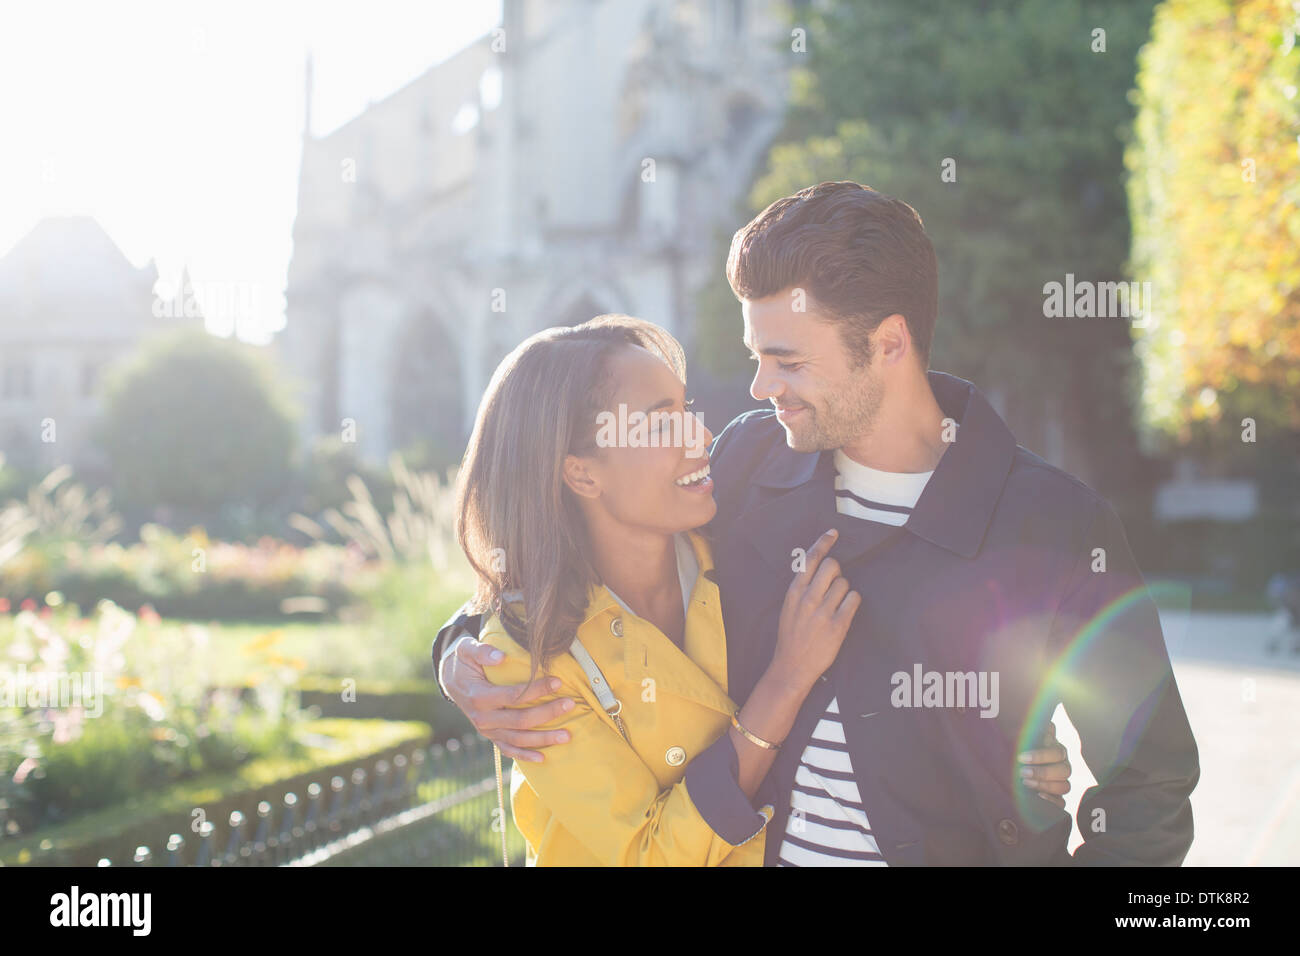 Couple hugging in urban park Banque D'Images